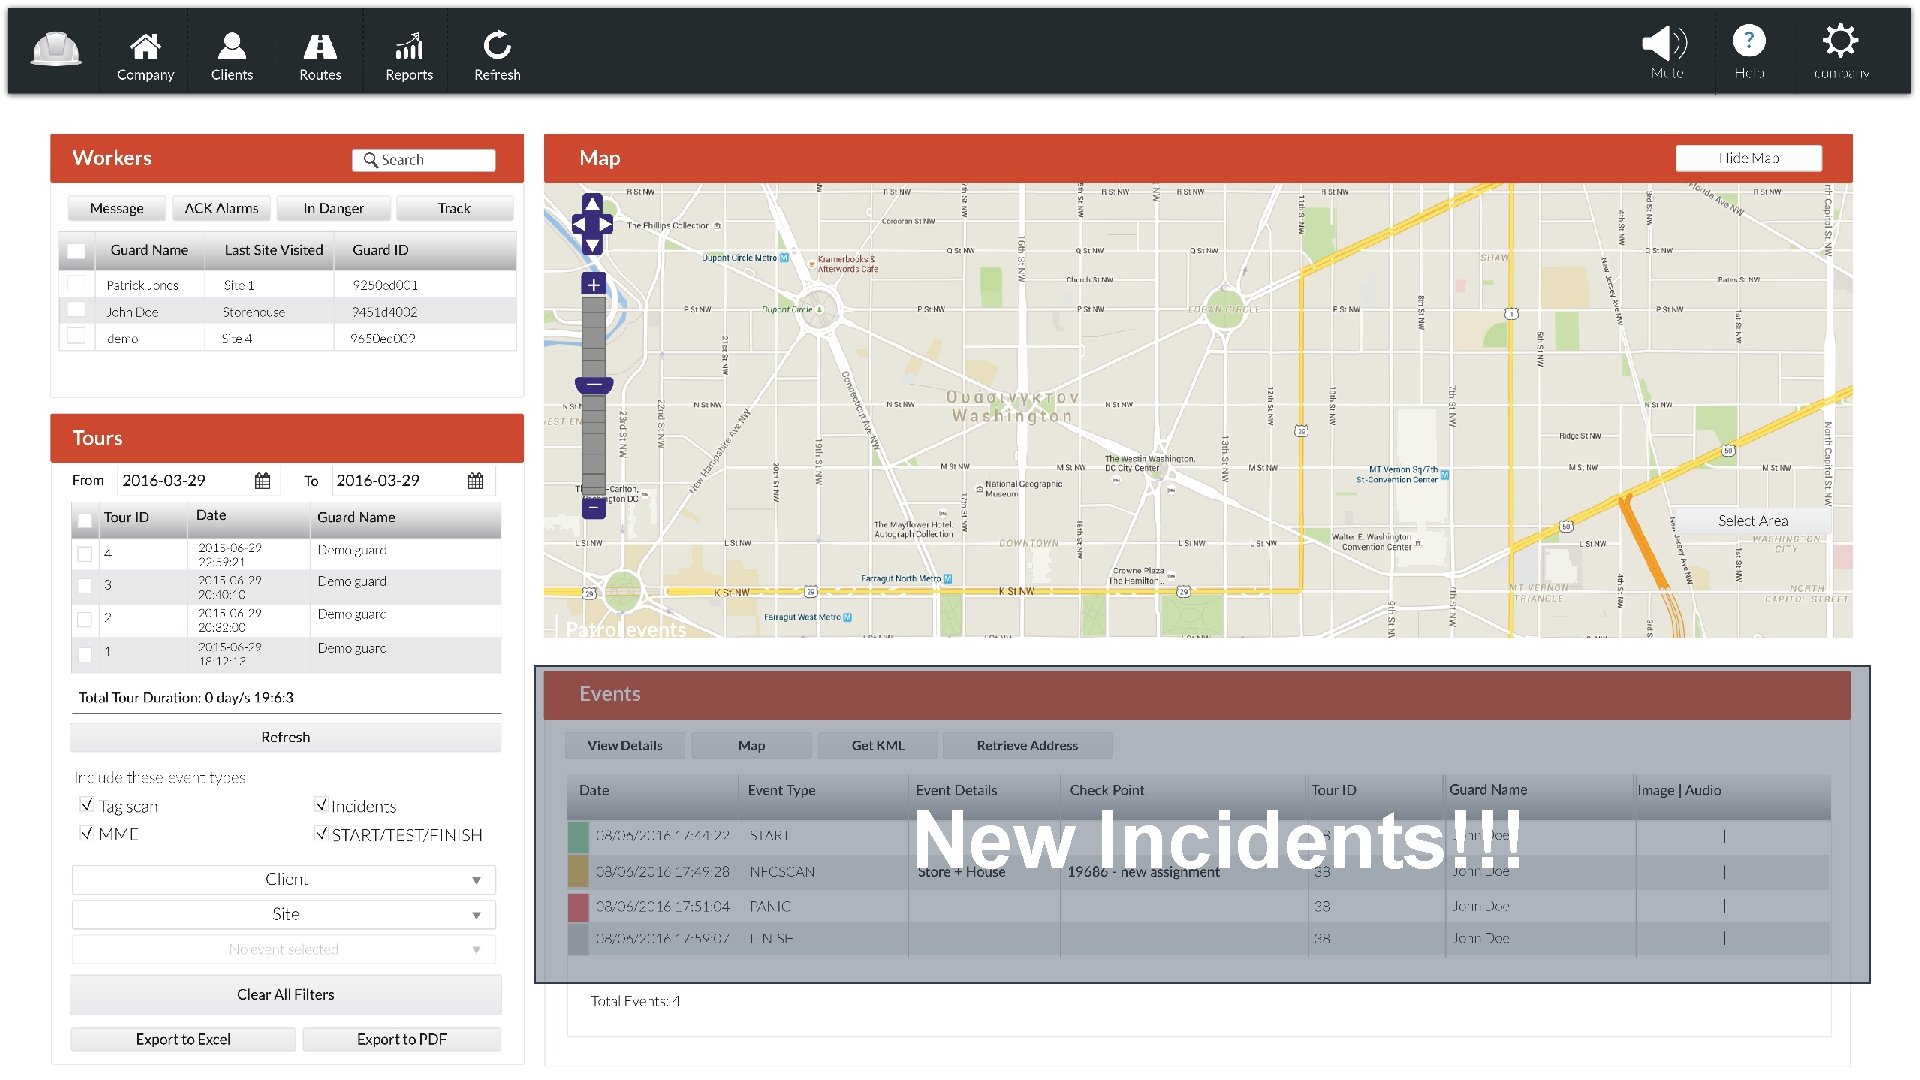 New Incidents!!! 